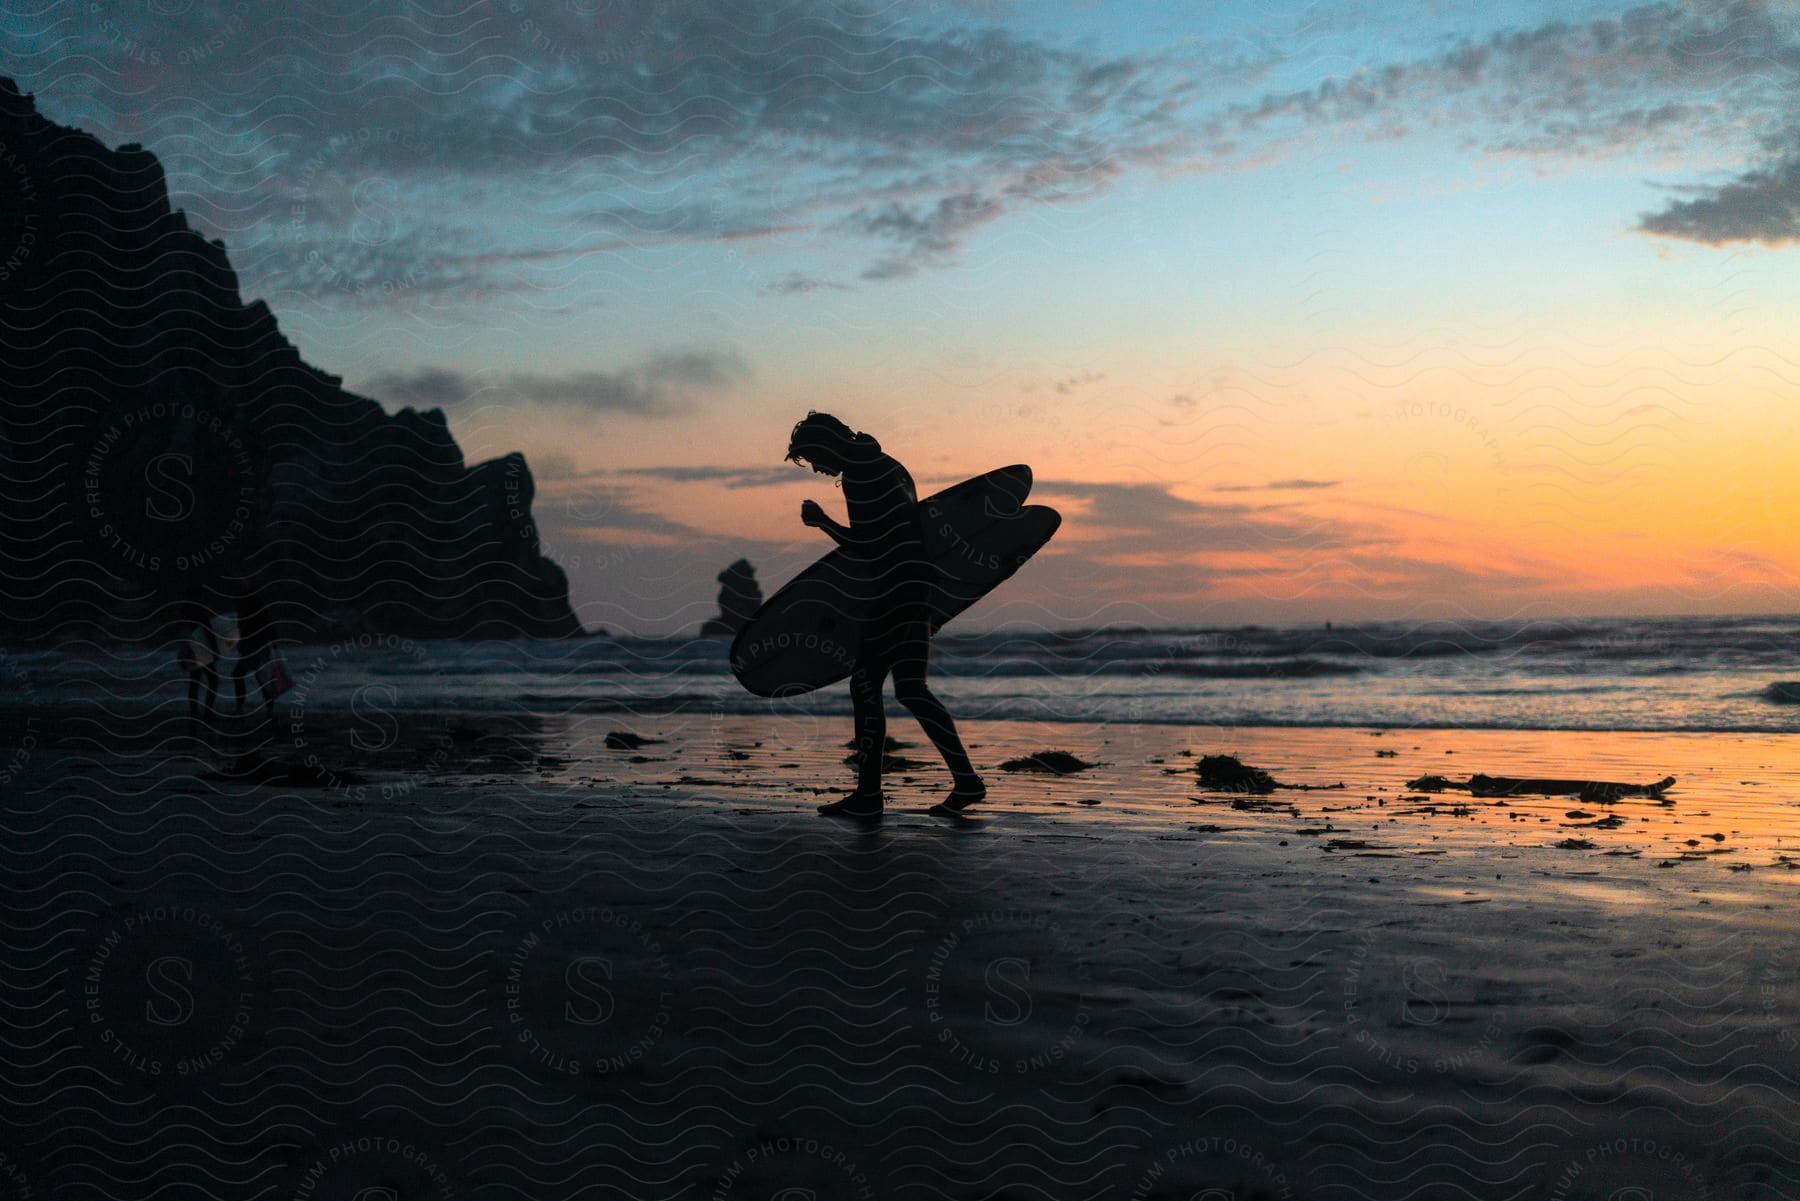 Surfer standing on beach holding a surfboard is silhouetted against red horizon during sunset.